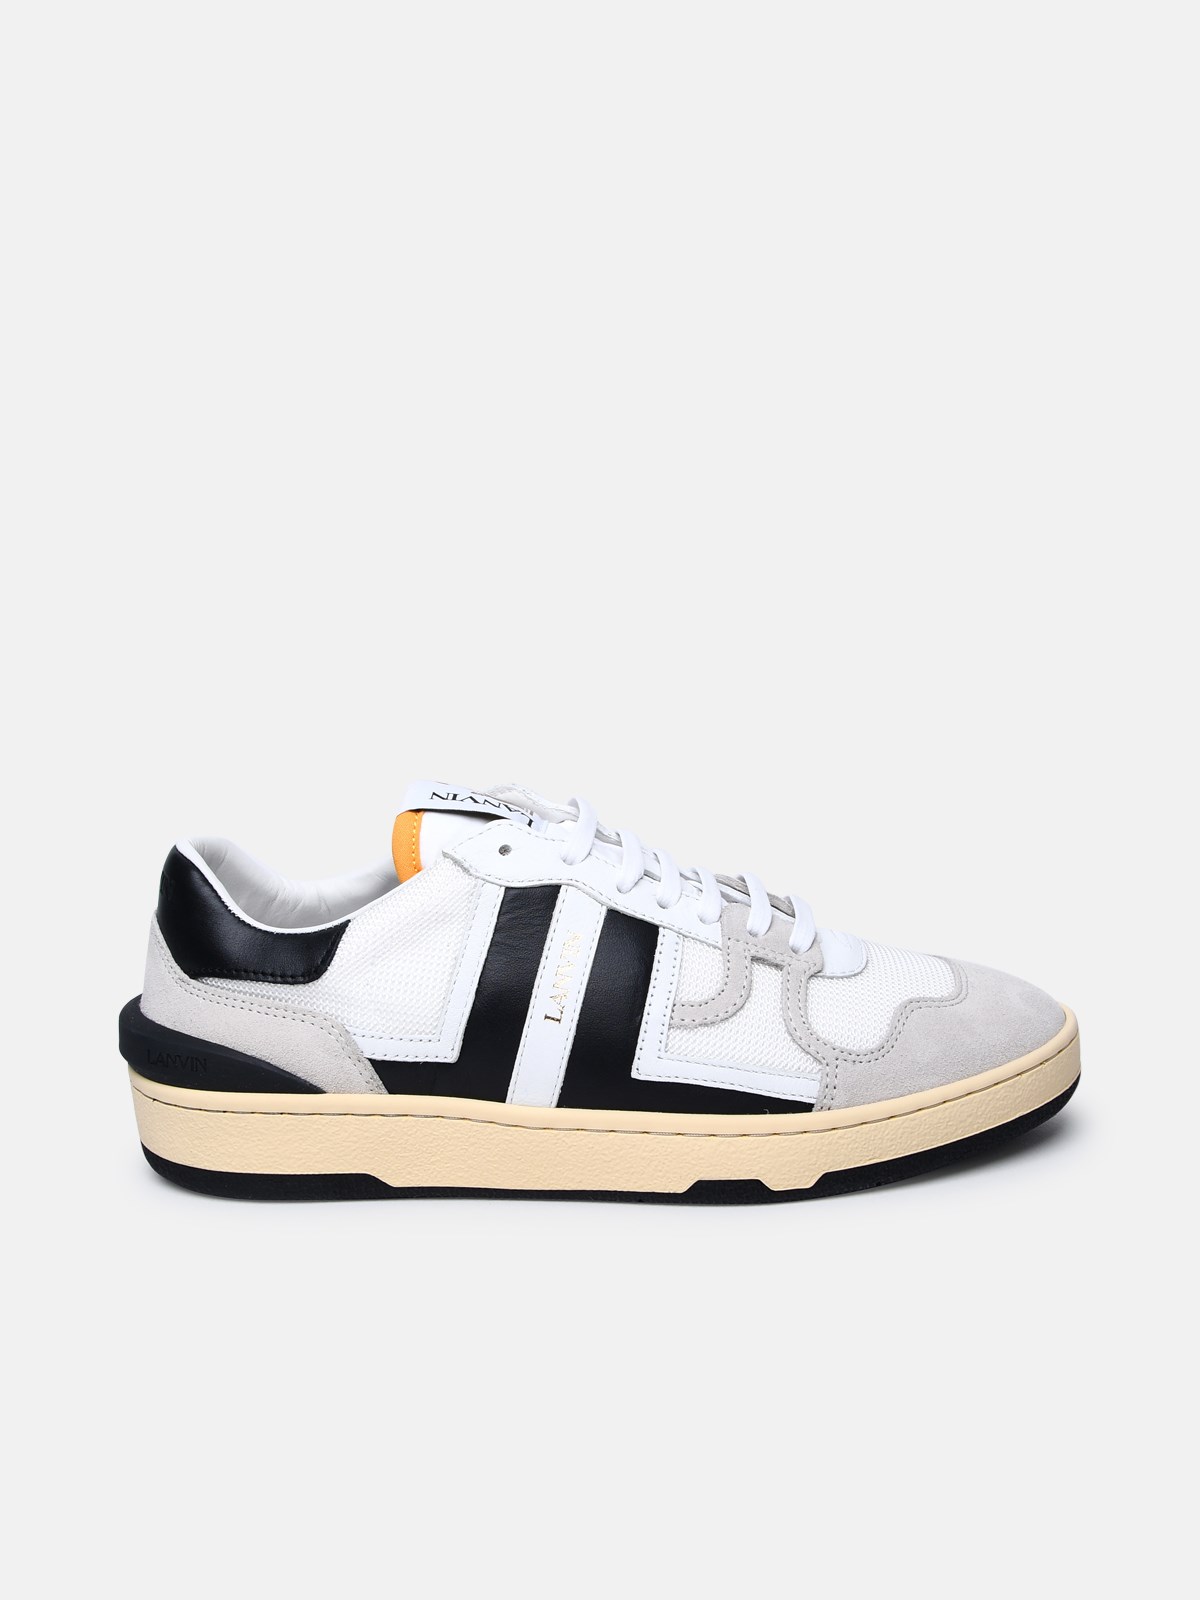 Lanvin Leather Low Clay Sneaker In White